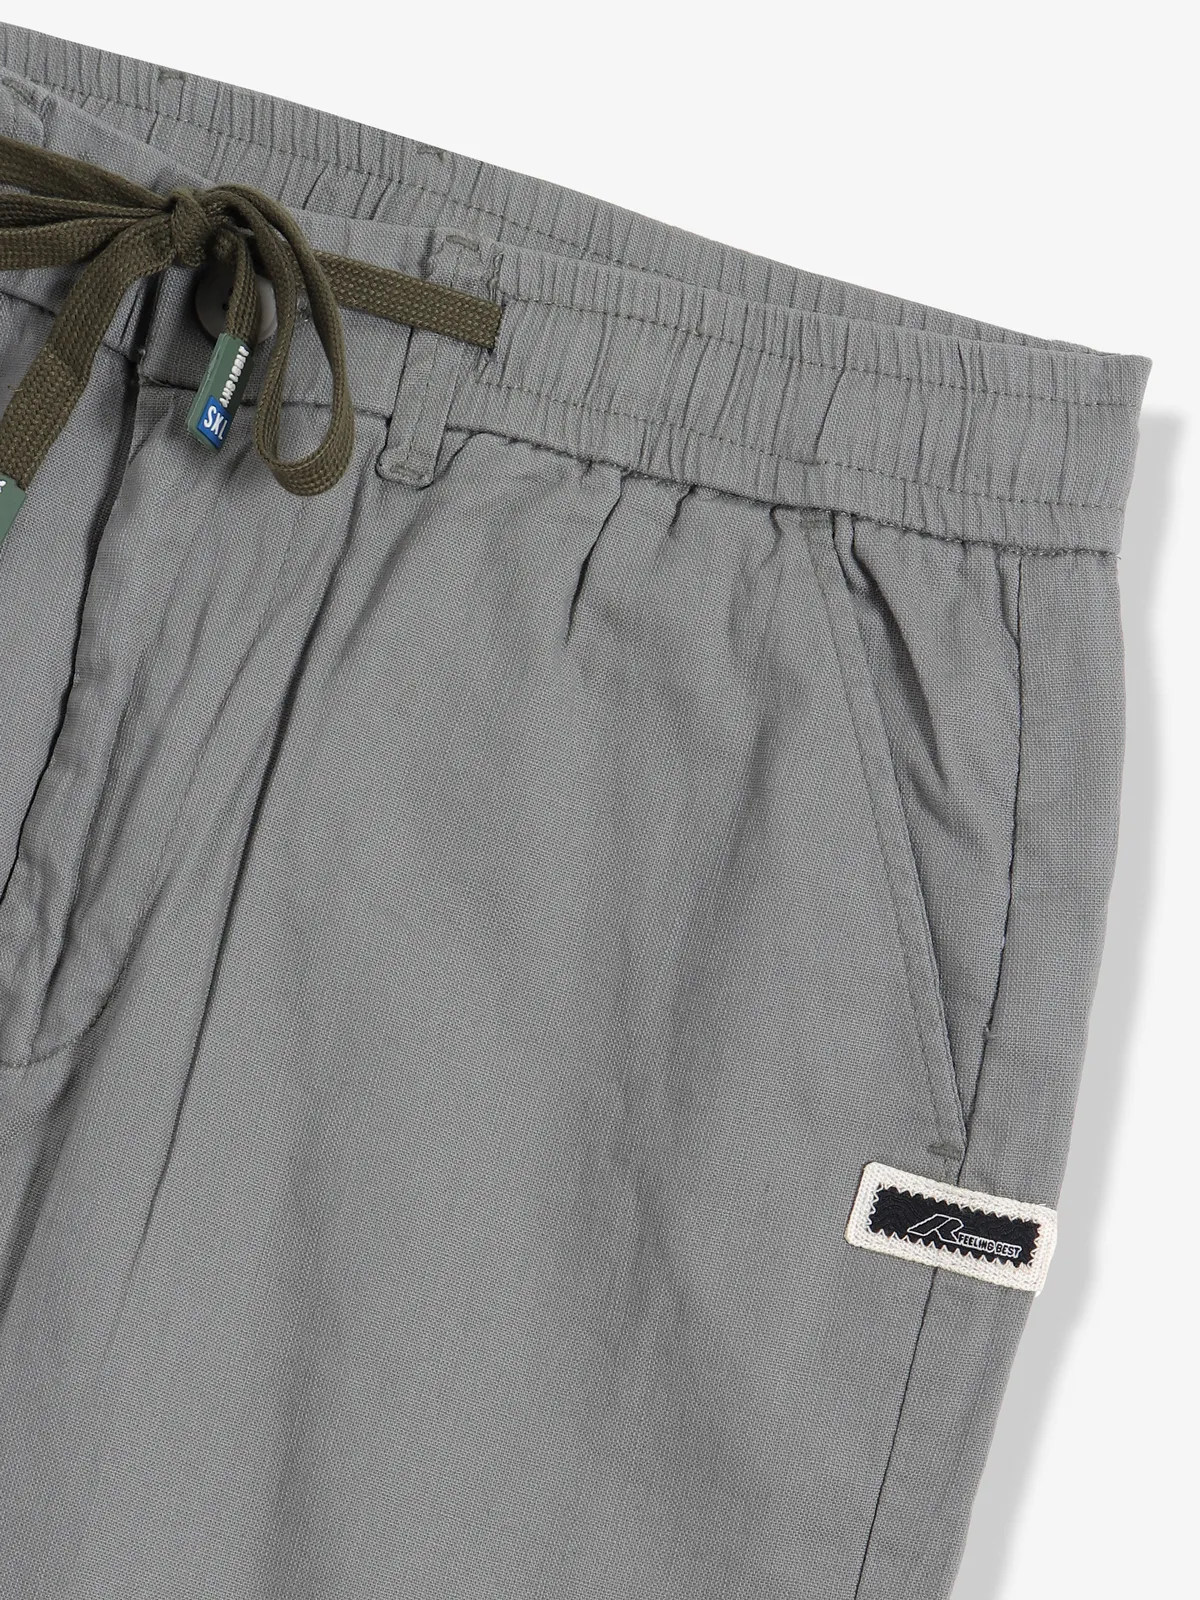 GS78 grey solid cotton track pant